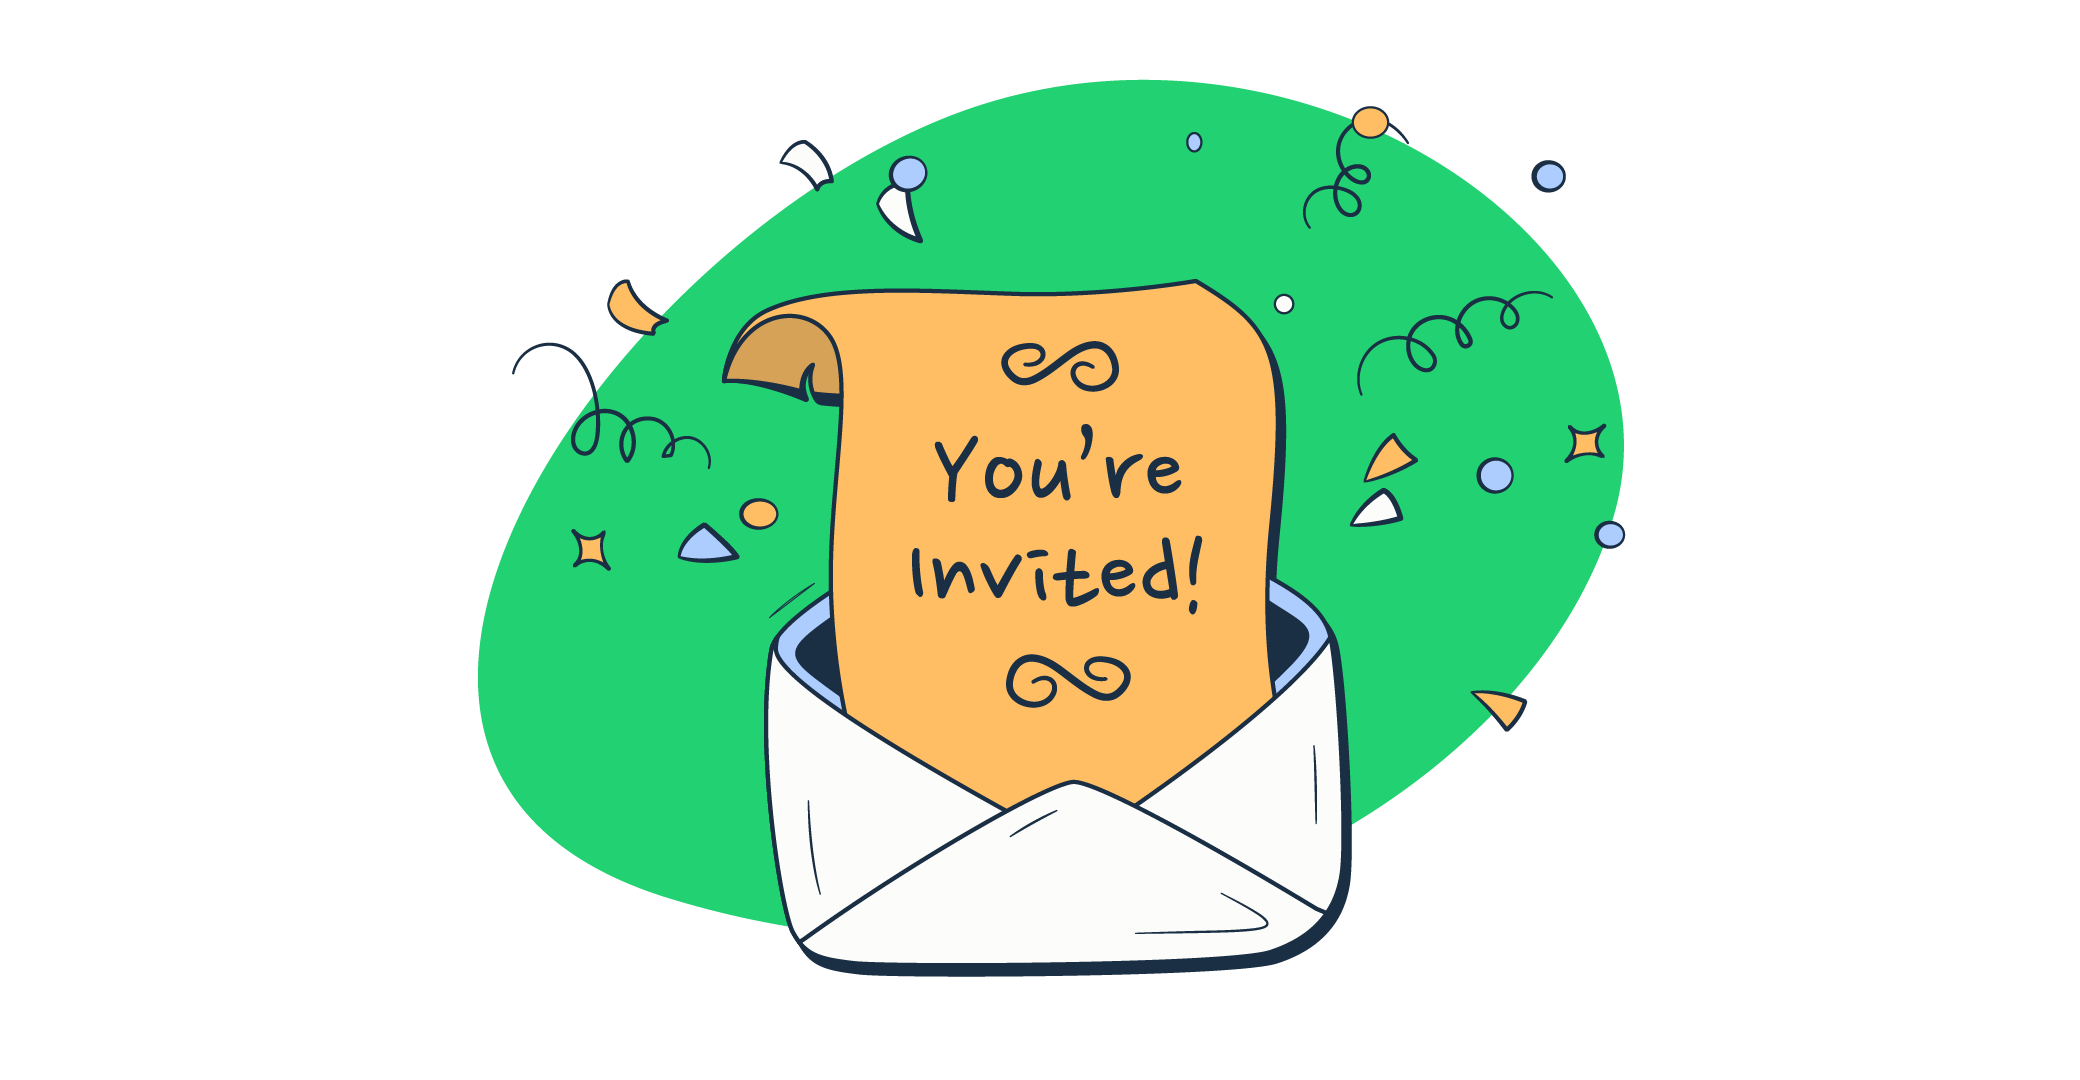 This is a featured image for an article on mastering event invitation emails